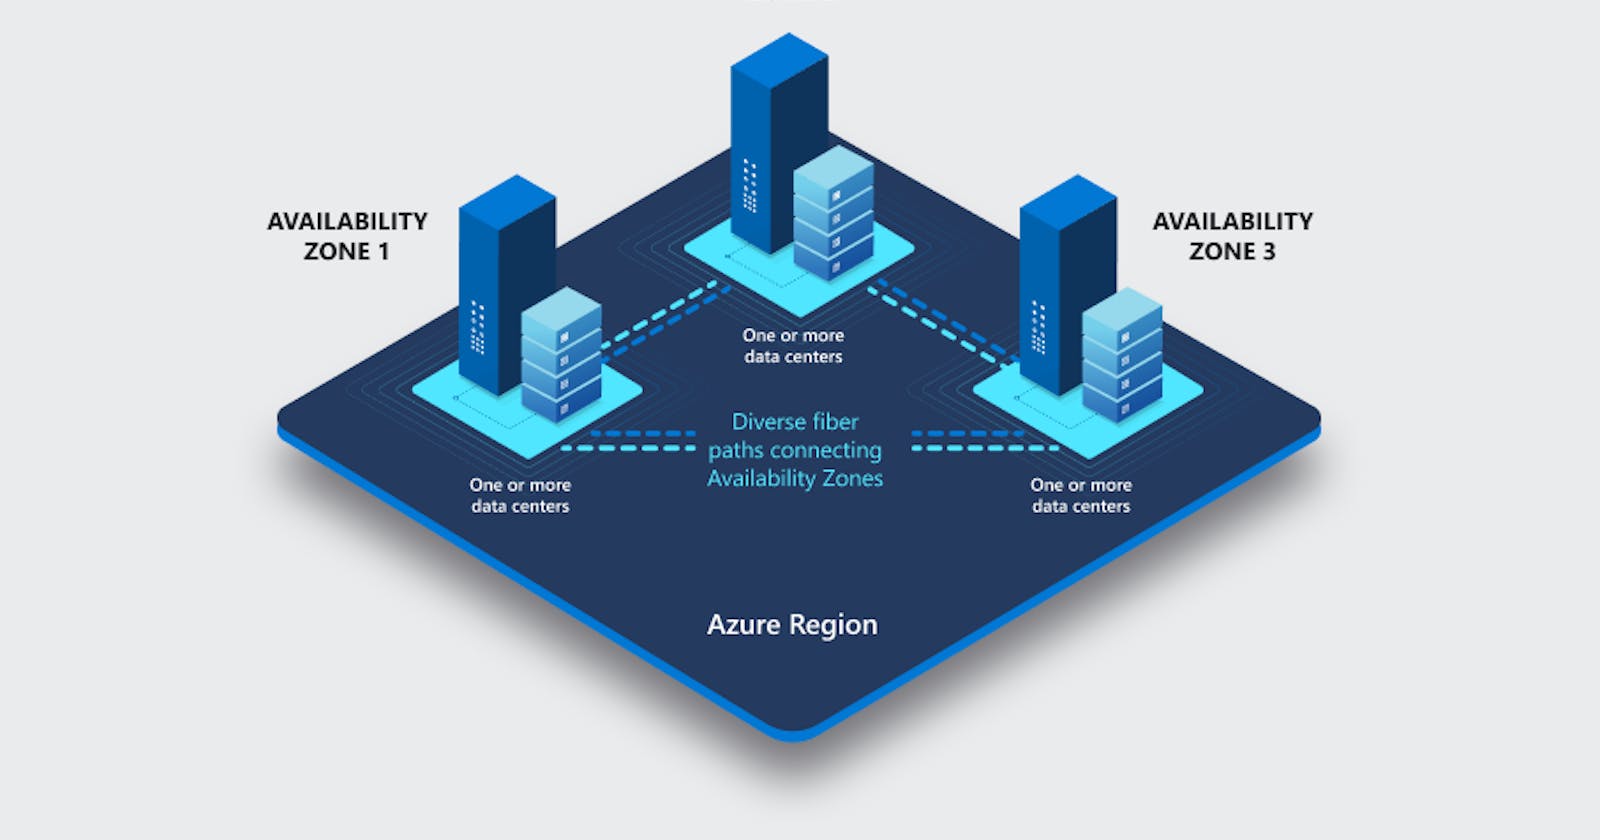 Dropping Availability Zone setting from Azure VMs